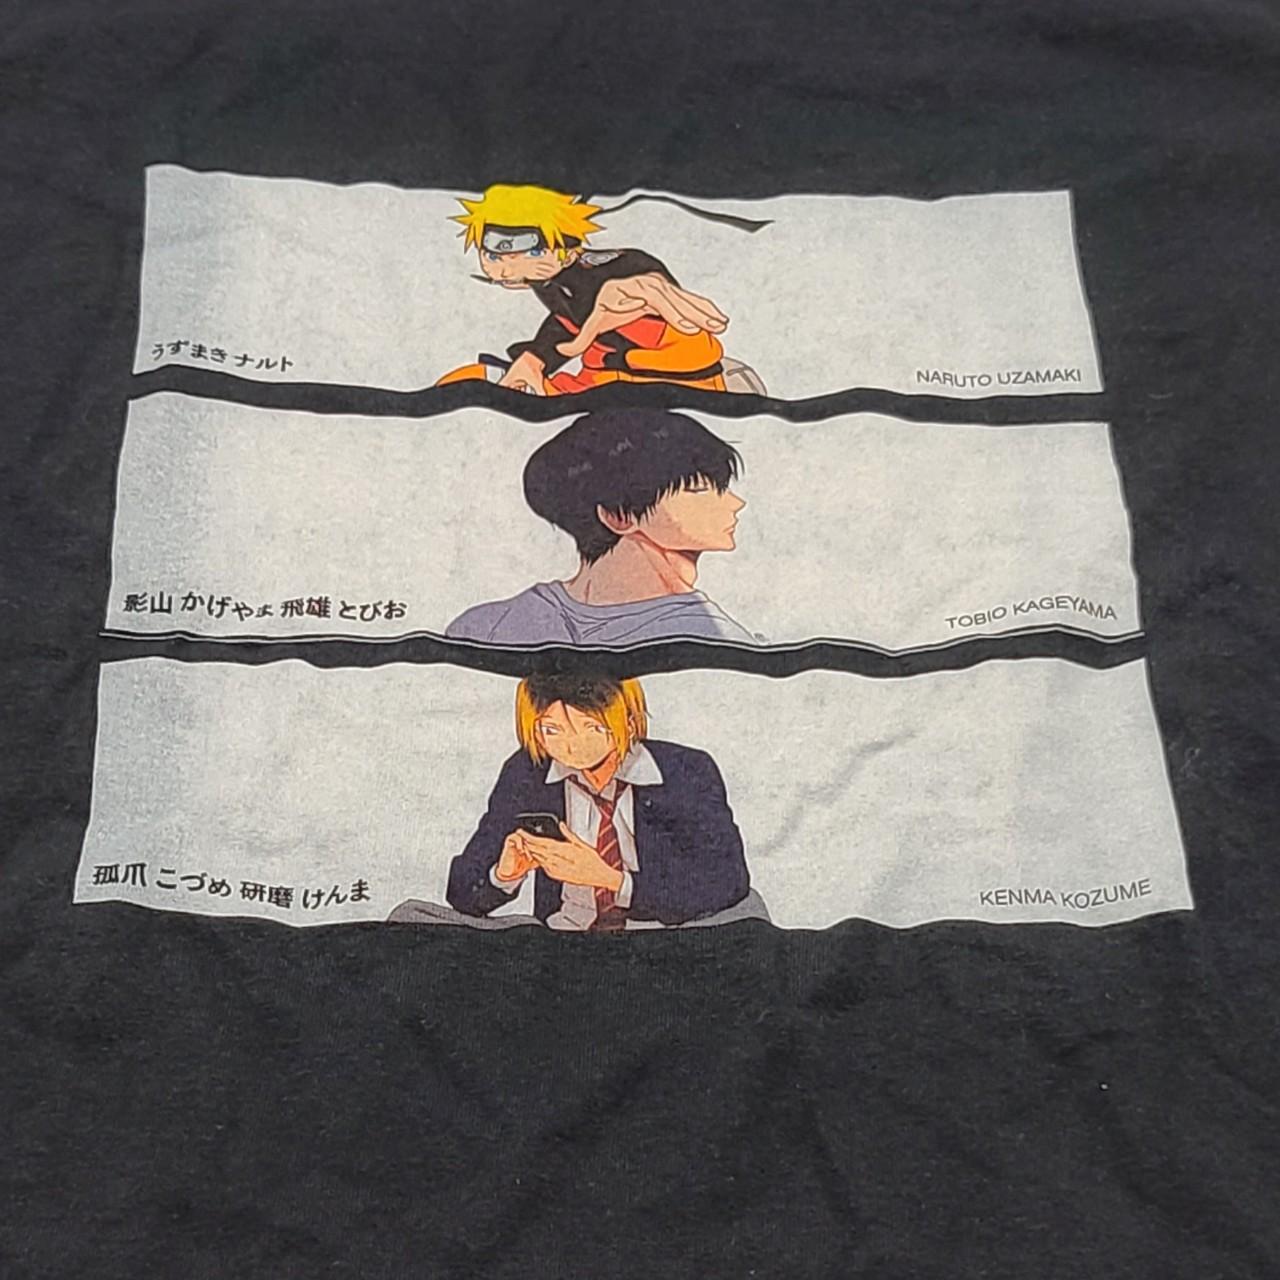 Who is Tobio in Naruto?